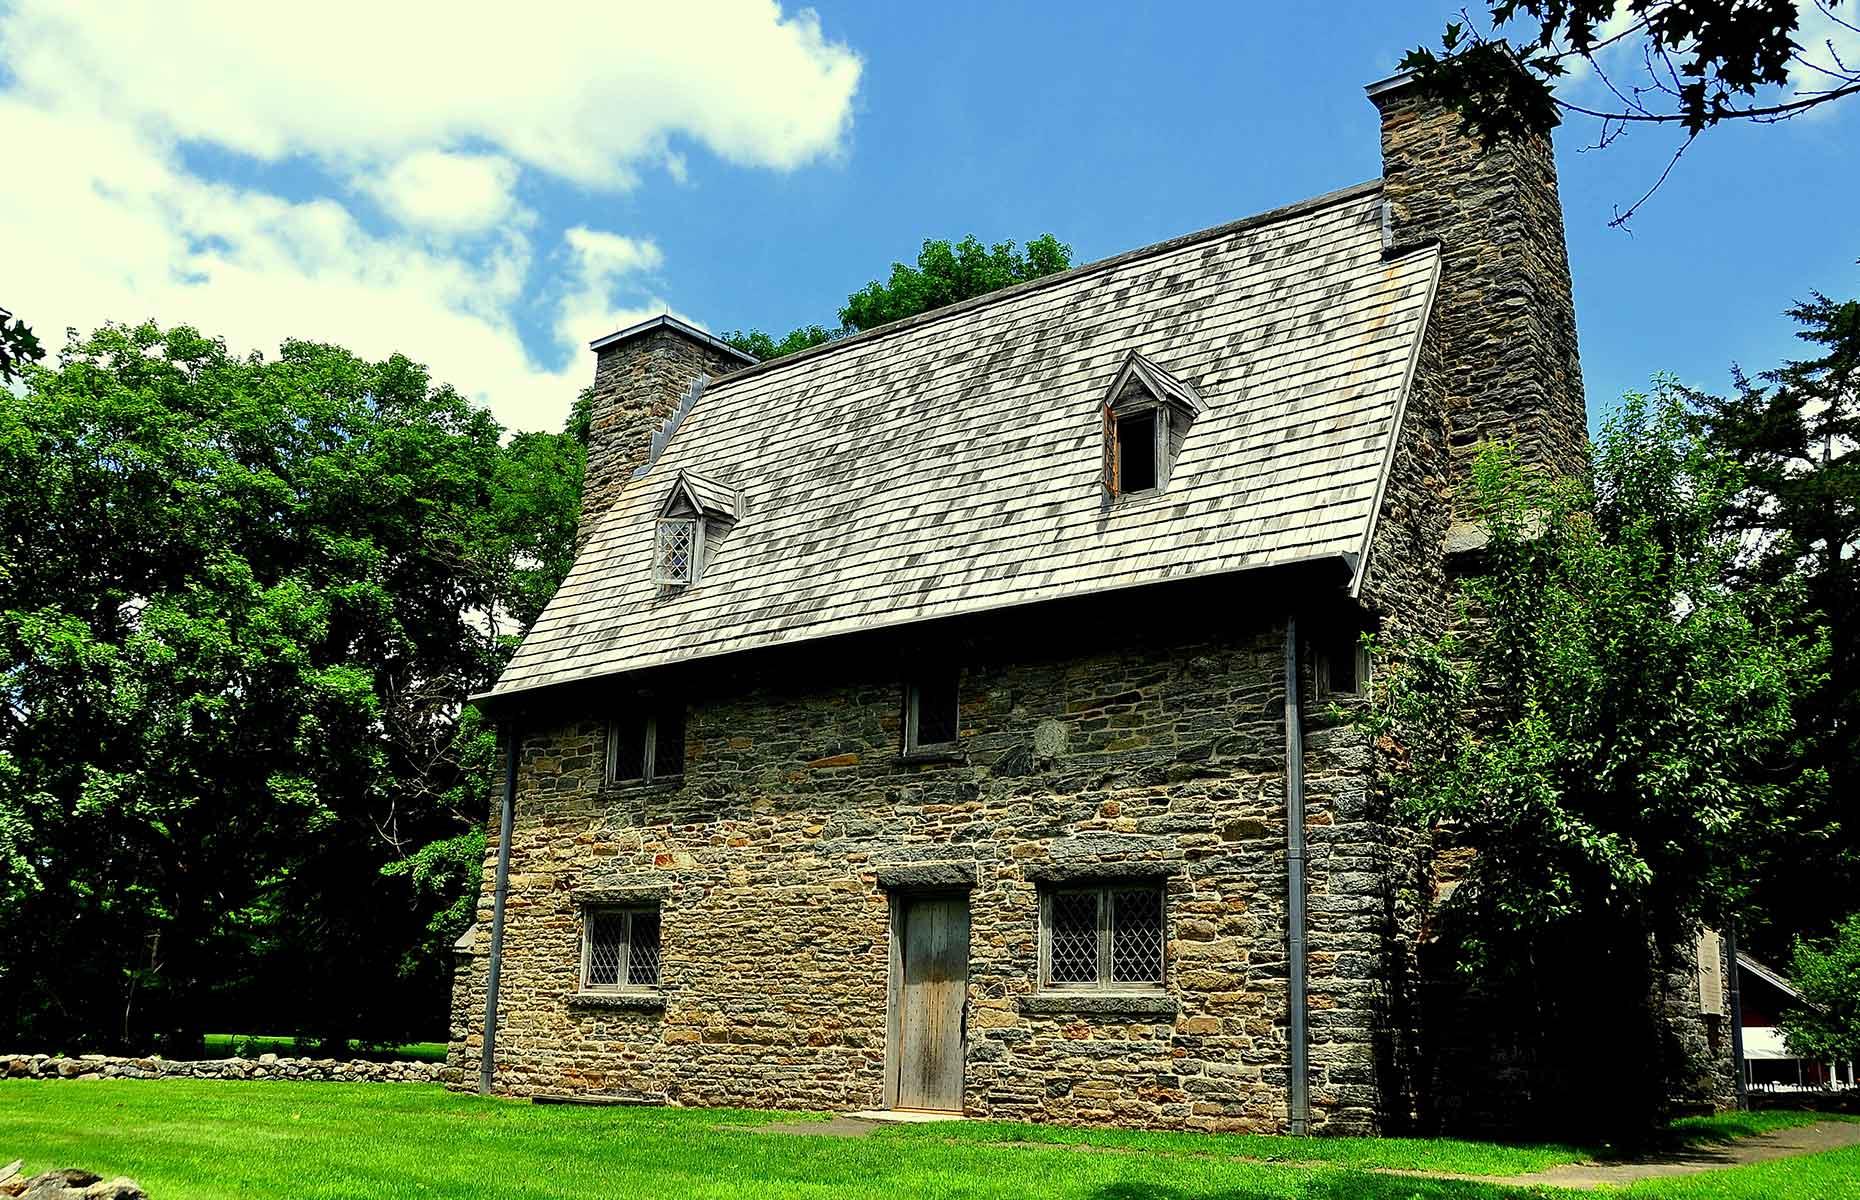 <p>One of the longest-standing – and most impressive – stone structures in New England is the Henry Whitfield House in Connecticut. It was constructed using local granite stone in 1639 for Henry Whitfield (one of the town of Guilford’s founders). You can visit the centuries-old cottage as part of the <a href="https://portal.ct.gov/ECD-HenryWhitfieldStateMuseum">Henry Whitfield State Museum</a>.</p>  <p><a href="https://www.loveexploring.com/galleries/161923/29-incredible-things-you-never-knew-about-the-united-states?page=1"><strong>Here are 29 incredible things you never knew about the US</strong></a></p>